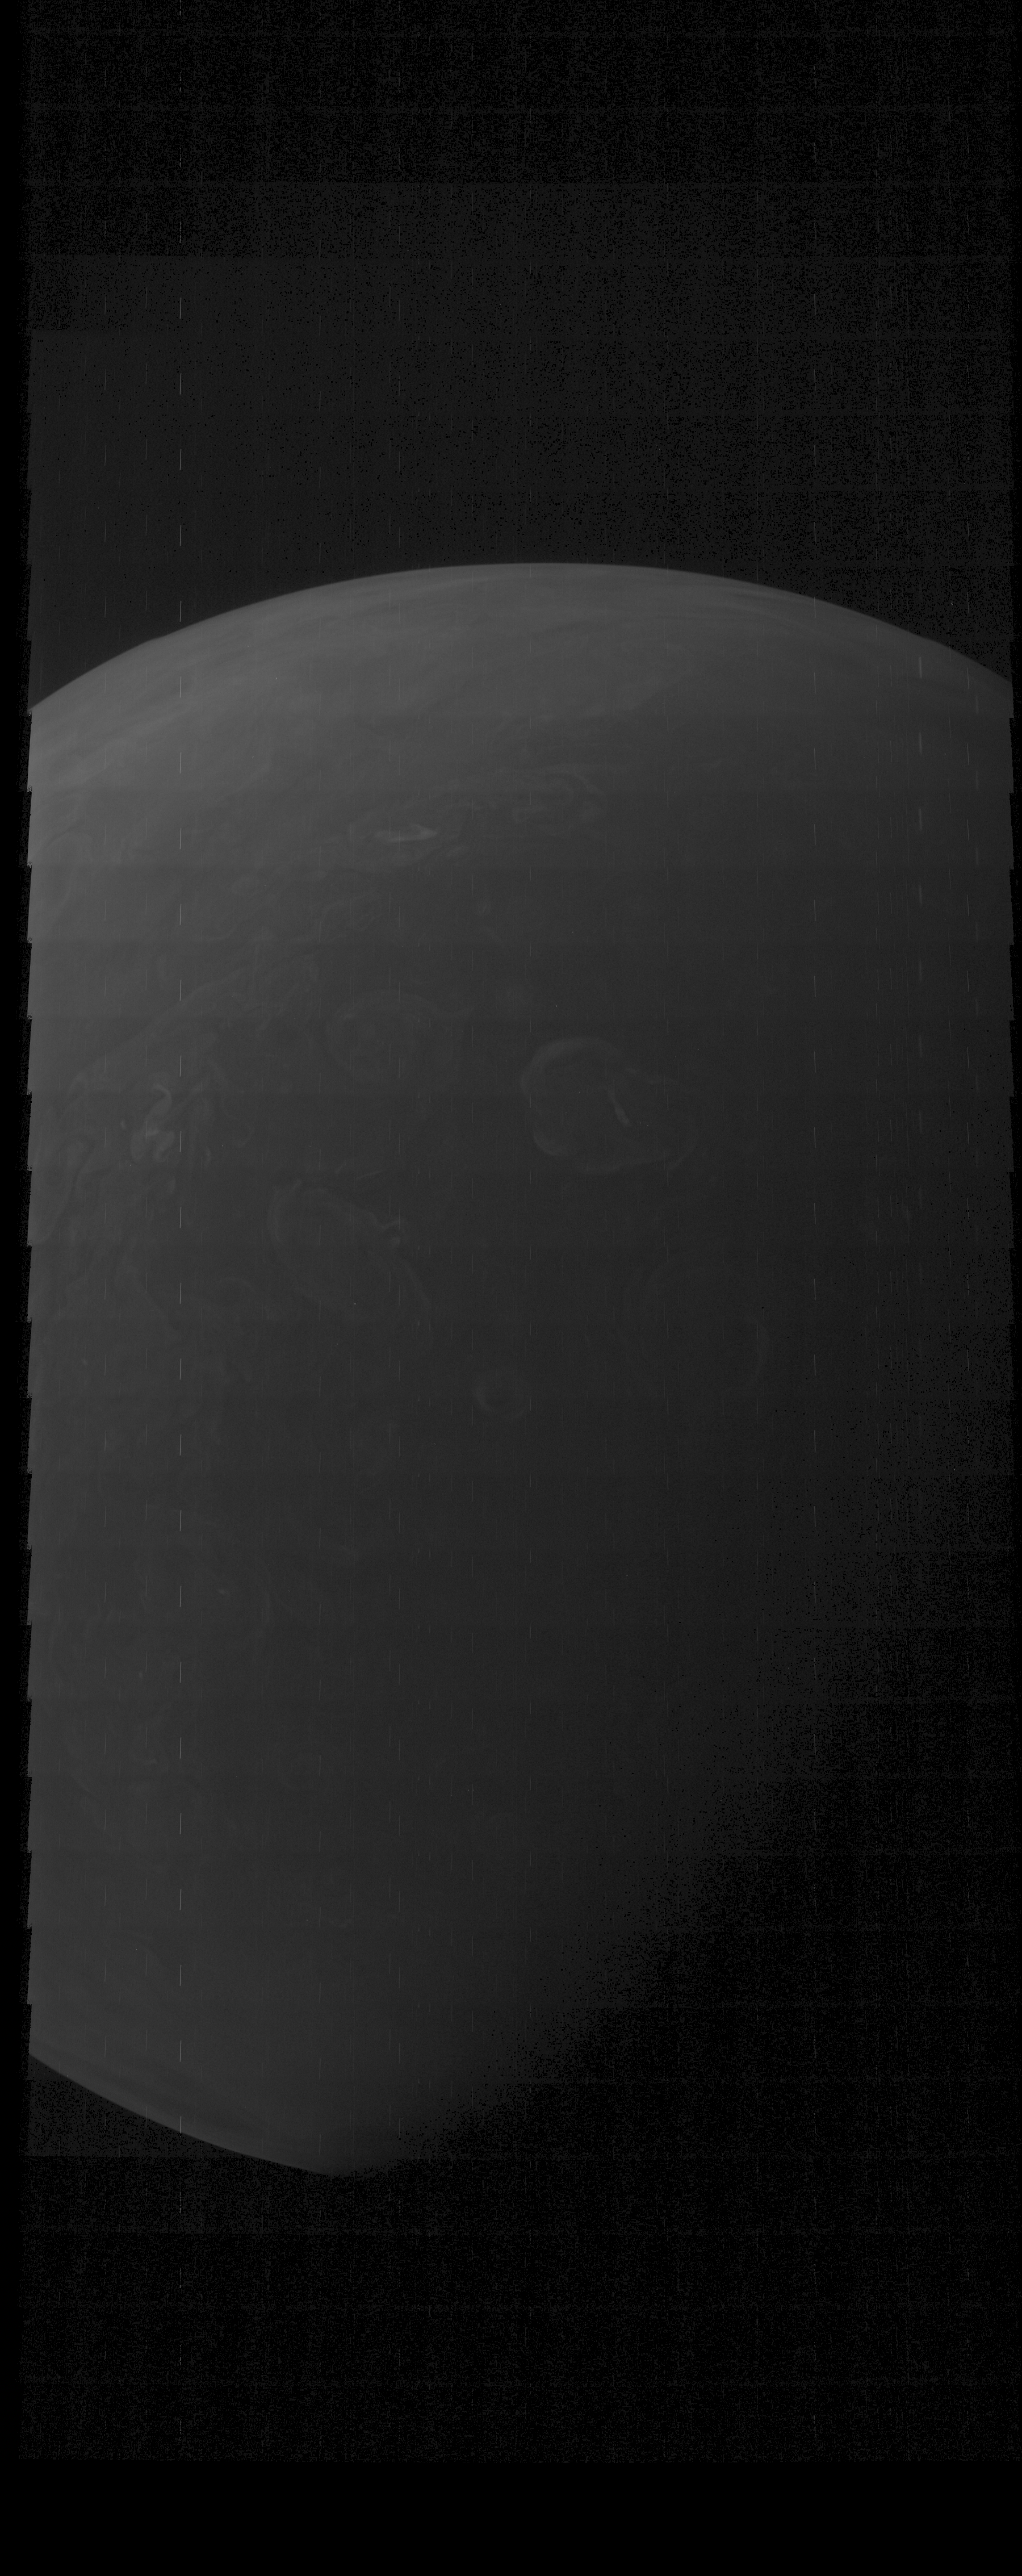 JNCE_2021333_38M00011_V01-raw_proc_hollow_sphere_m_pj_out.BMP_thumbnail_.png